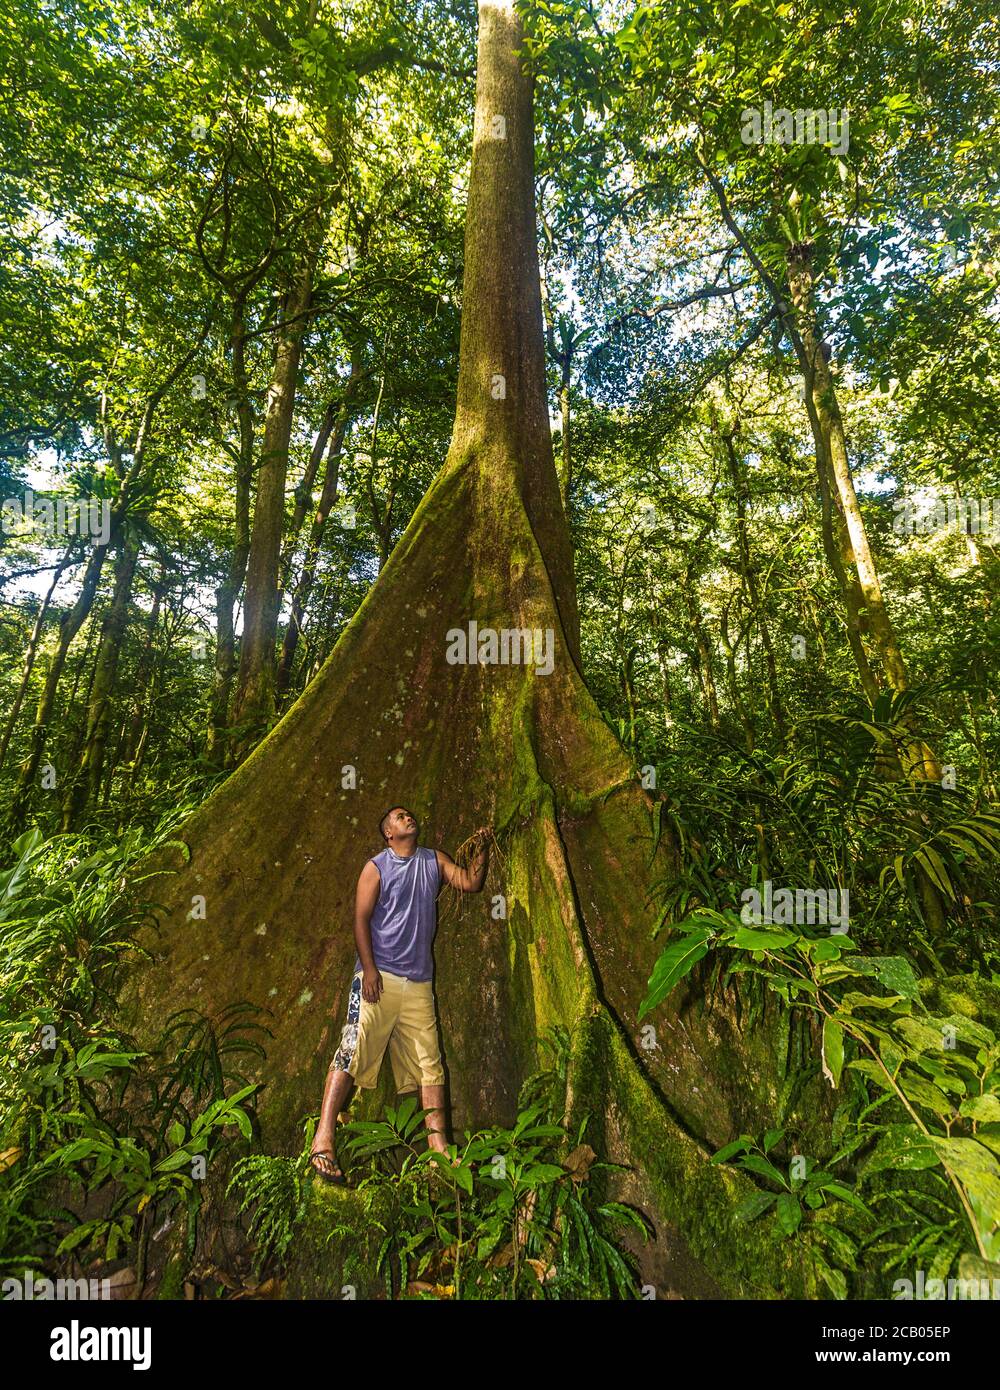 Man inspects a ka tree in Yela, a protected ka forest on Kosrae, Micronesia. The 86 acre forest is owned by 10 local families and is estimated to hold anywhere from 500 to 1,000 of these precious hardwood trees, along with at least 10 species of mangrove trees. The trees, which can grow to 80 feet with a 30 foot wide buttress at the base, are found only on Kosrae and Pohnpei. Locals use the trees to make their outrigger canoes, flooring and furniture. Stock Photo